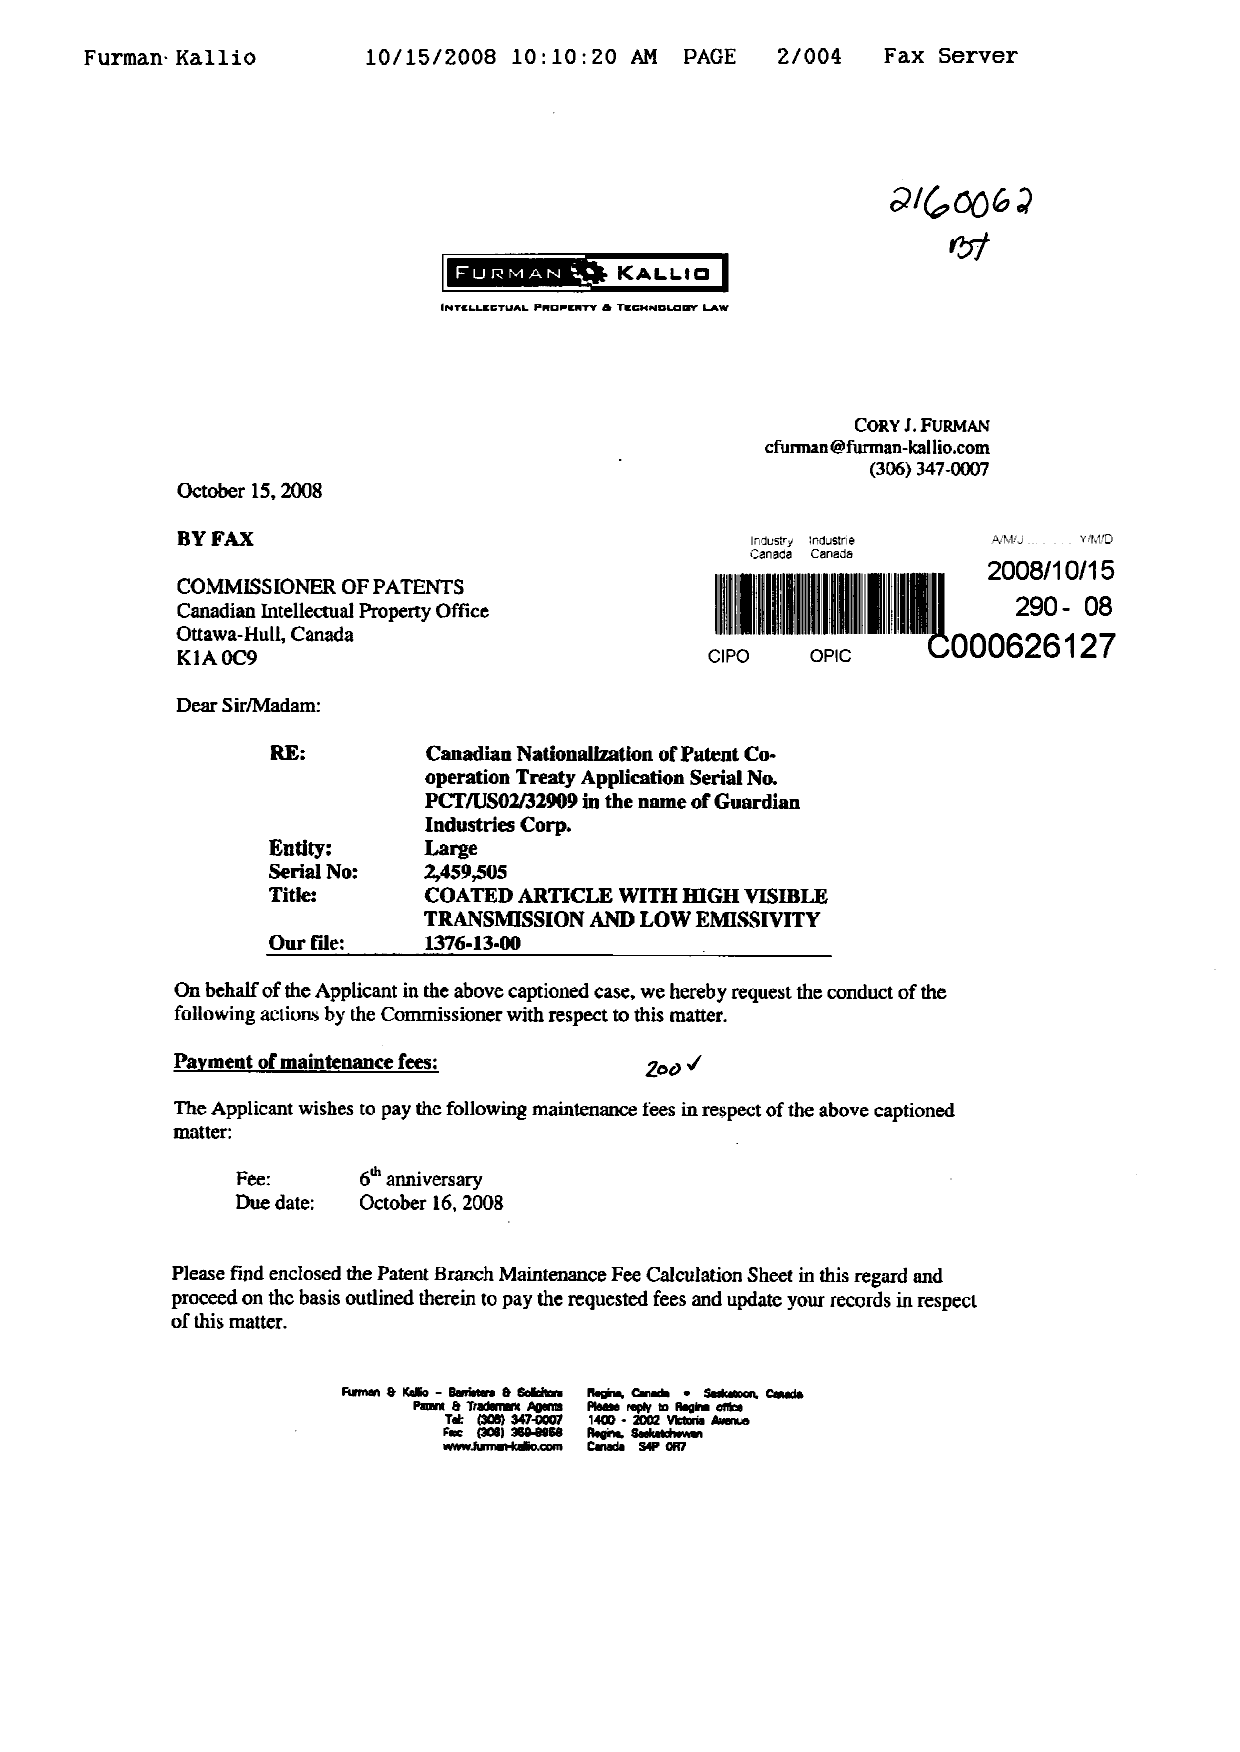 Canadian Patent Document 2459505. Fees 20081015. Image 1 of 4